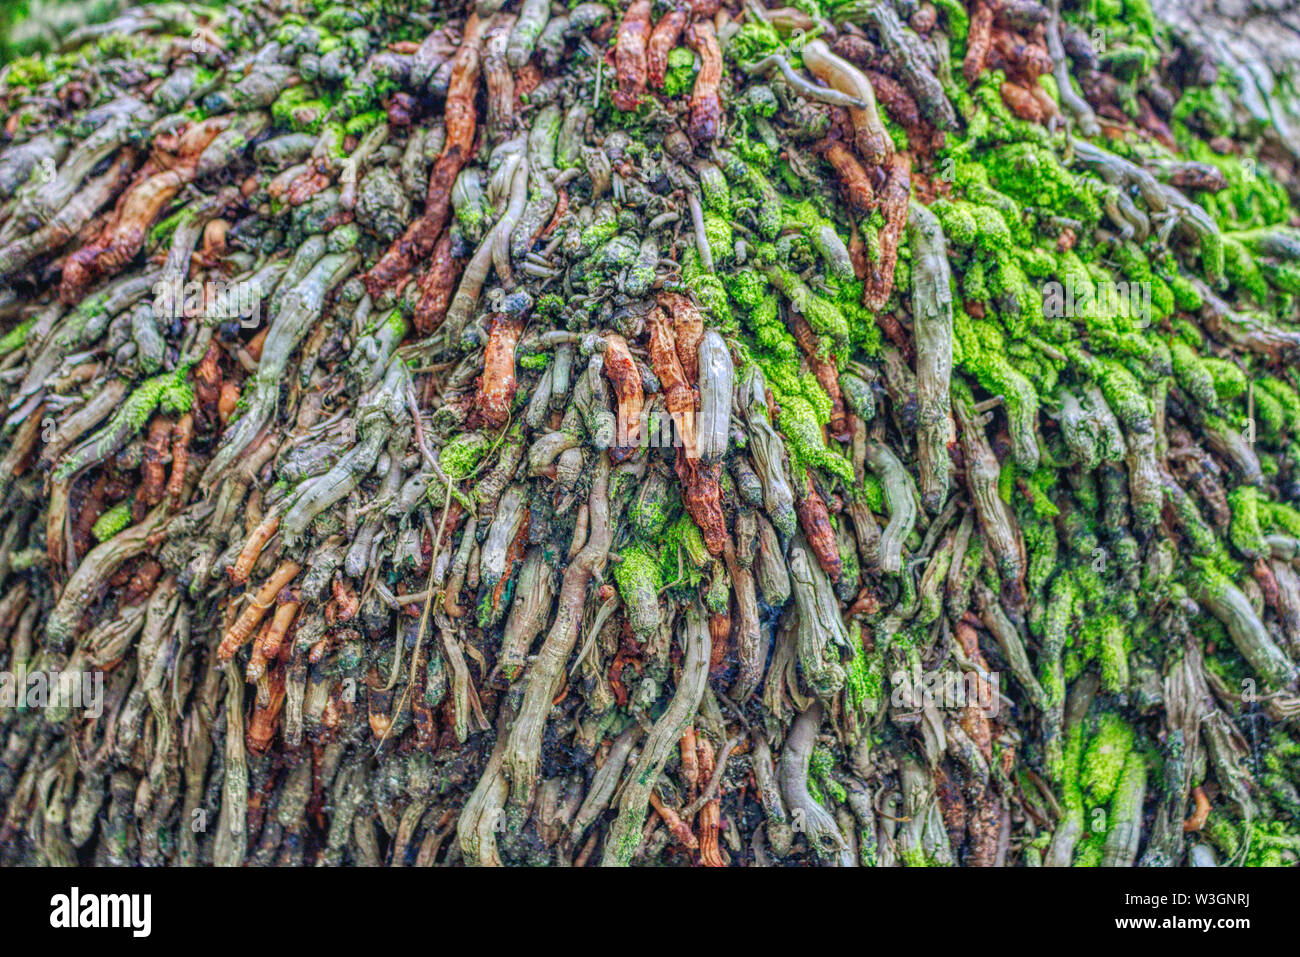 This unique photo shows a colorful tree root from a large coconut tree. This picture was taken in the Maldives Stock Photo